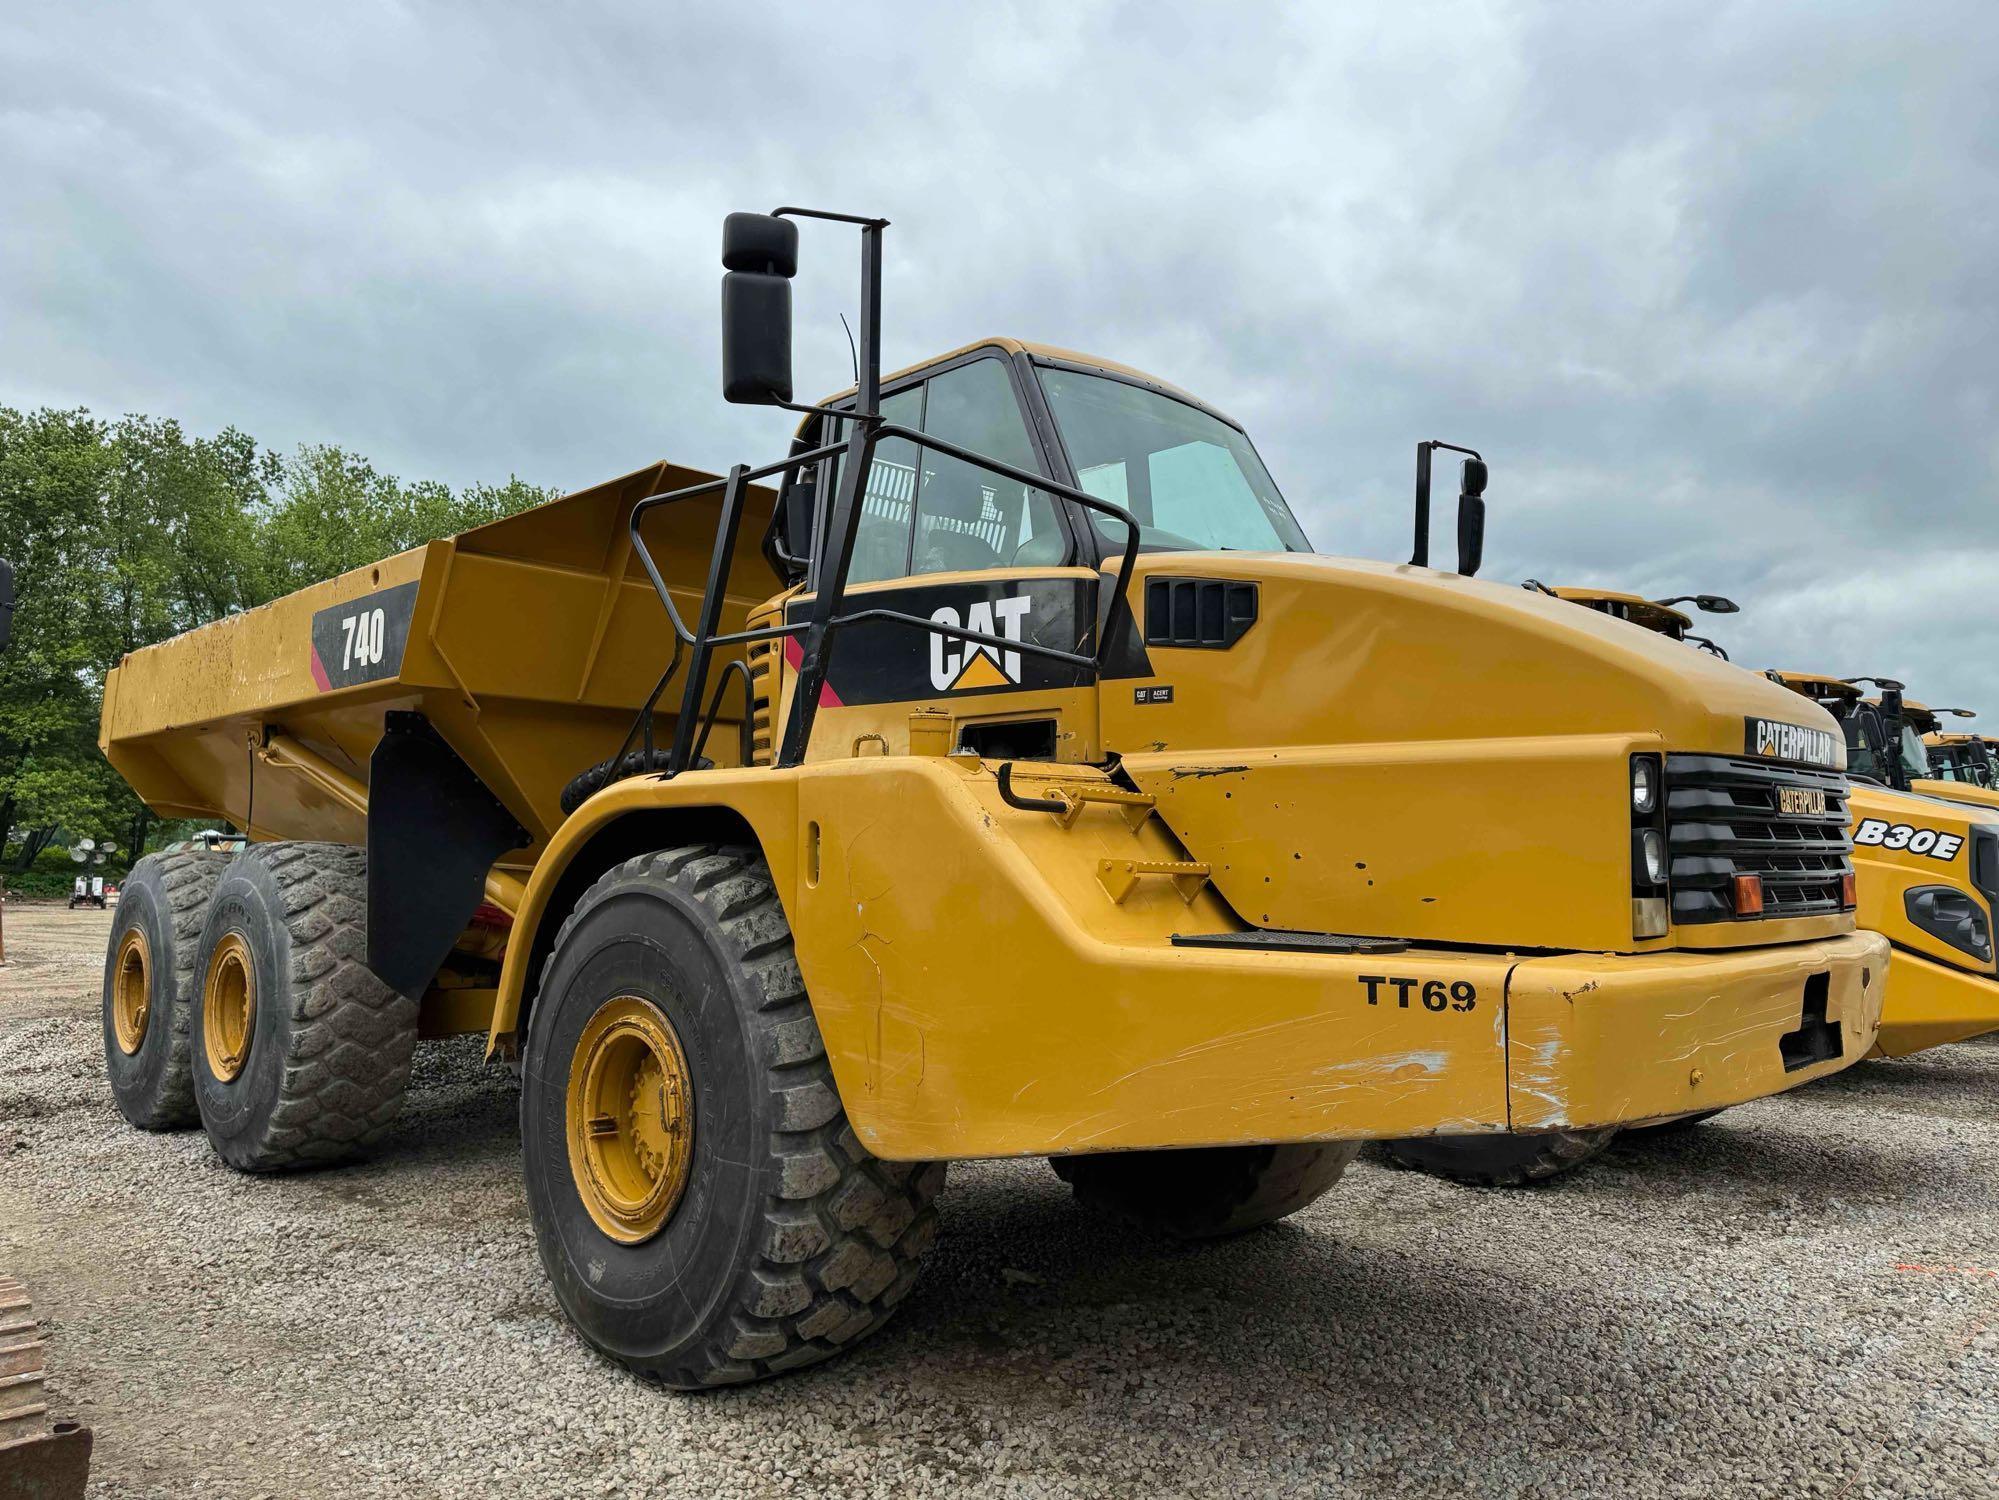 CAT 740 ARTICULATED HAUL TRUCK SN:B1P06302 6x6, powered by Cat diesel engine, equipped with Cab,